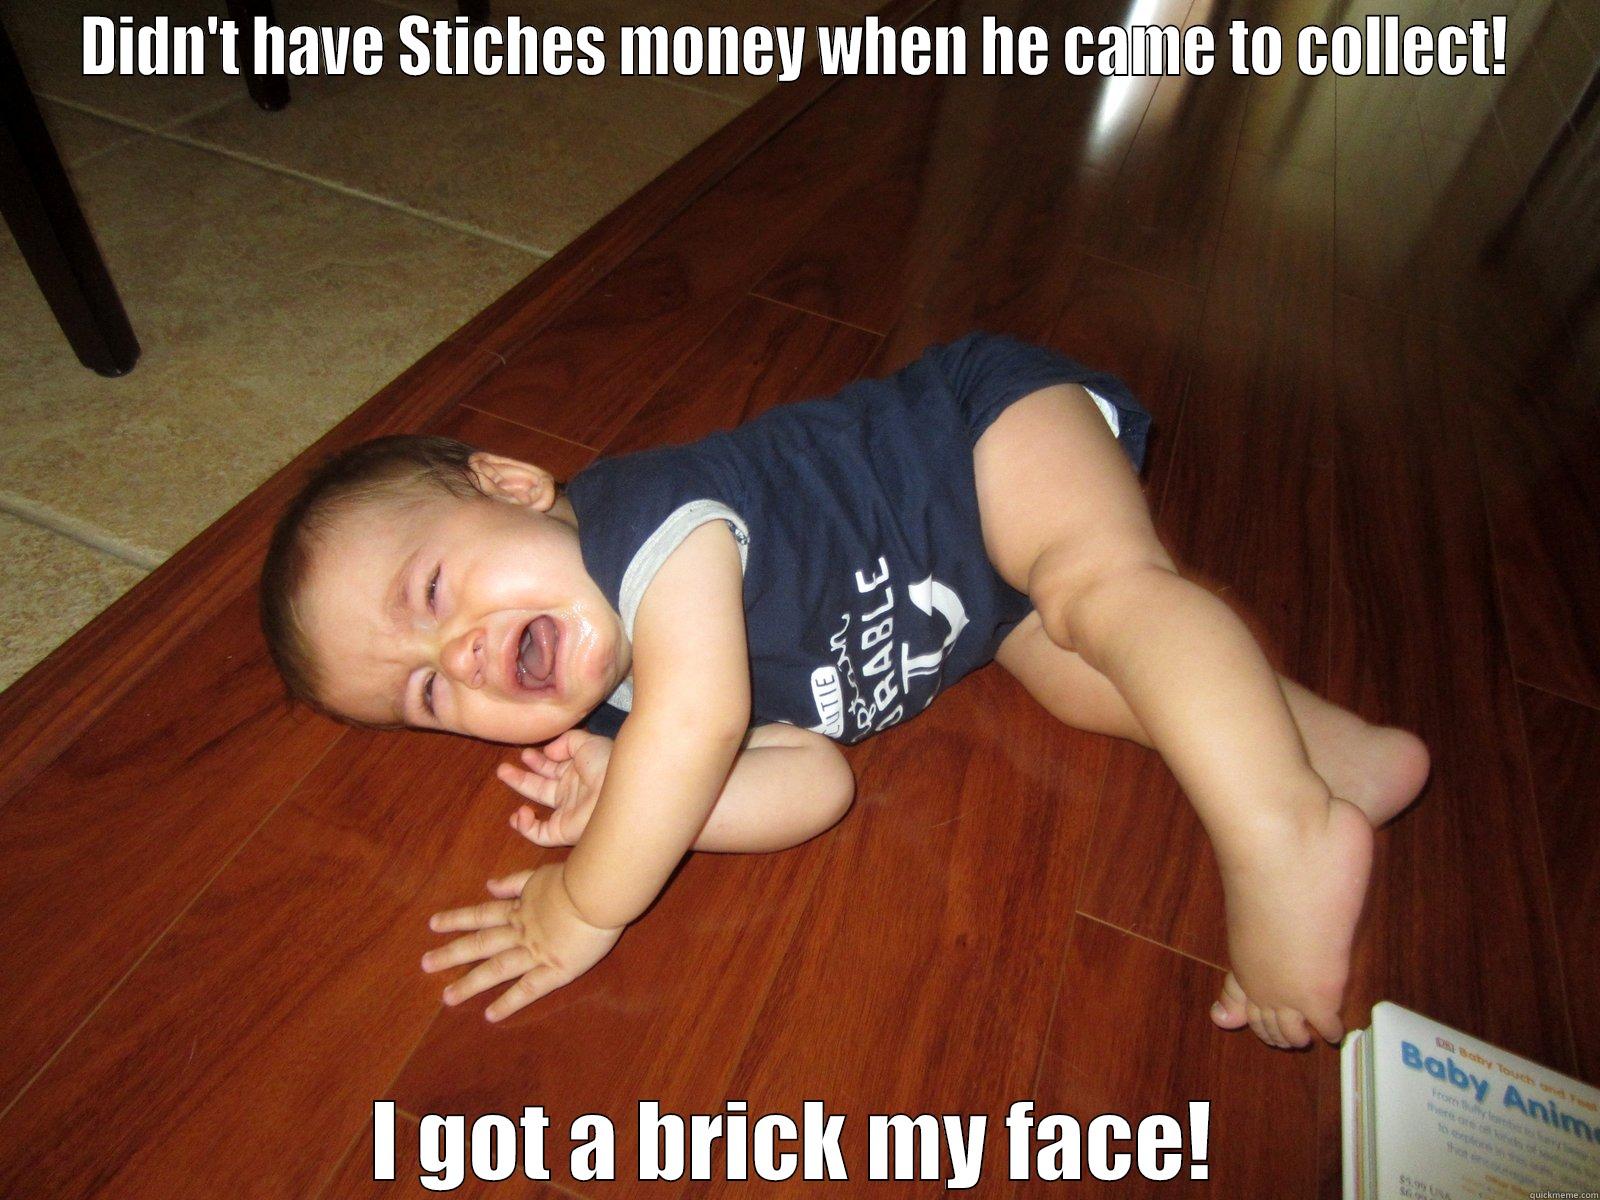 baby brick - DIDN'T HAVE STICHES MONEY WHEN HE CAME TO COLLECT! I GOT A BRICK MY FACE! Misc